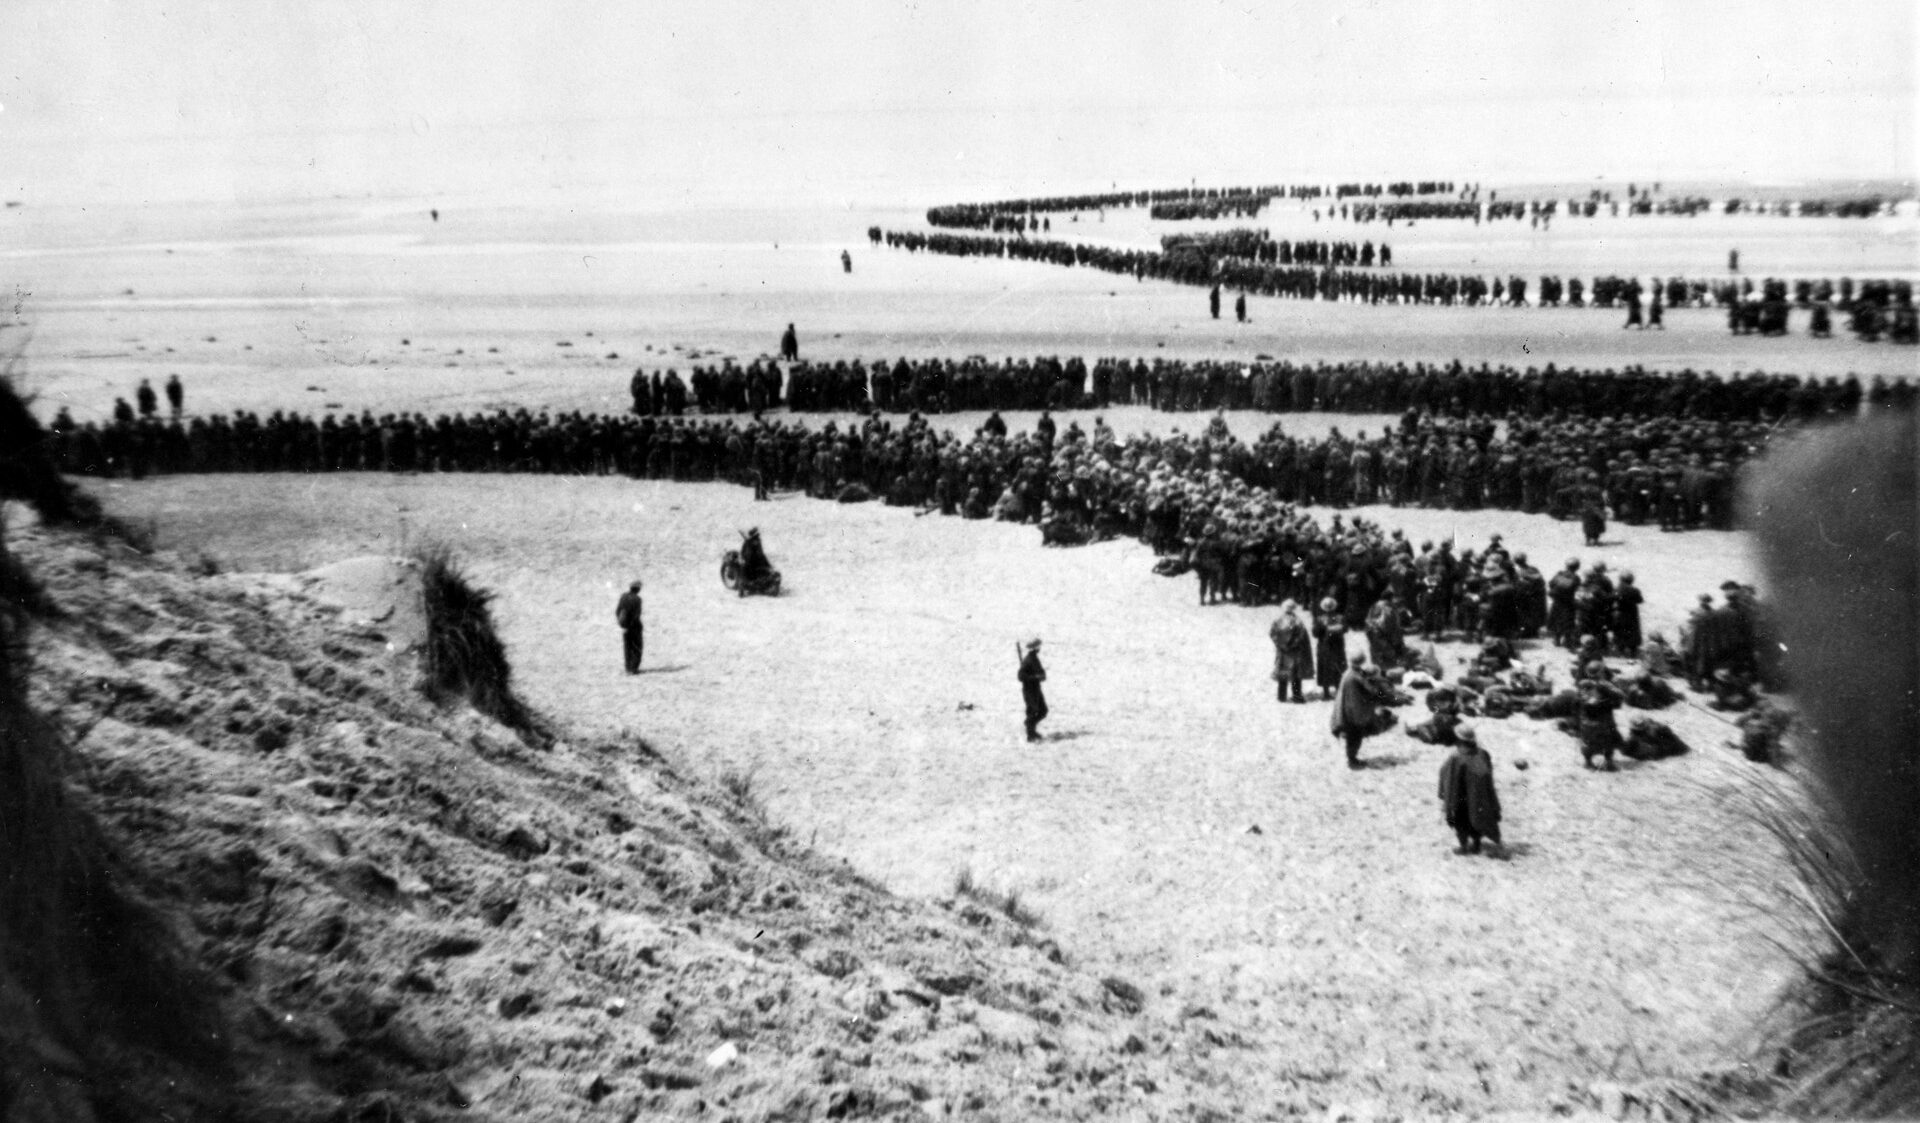 This iconic photo of British troops massed along the beach at Dunkirk provides a glimpse into the magnitude of Operation Dynamo. The sealift involved both military and civilian watercraft crossing the English Channel.